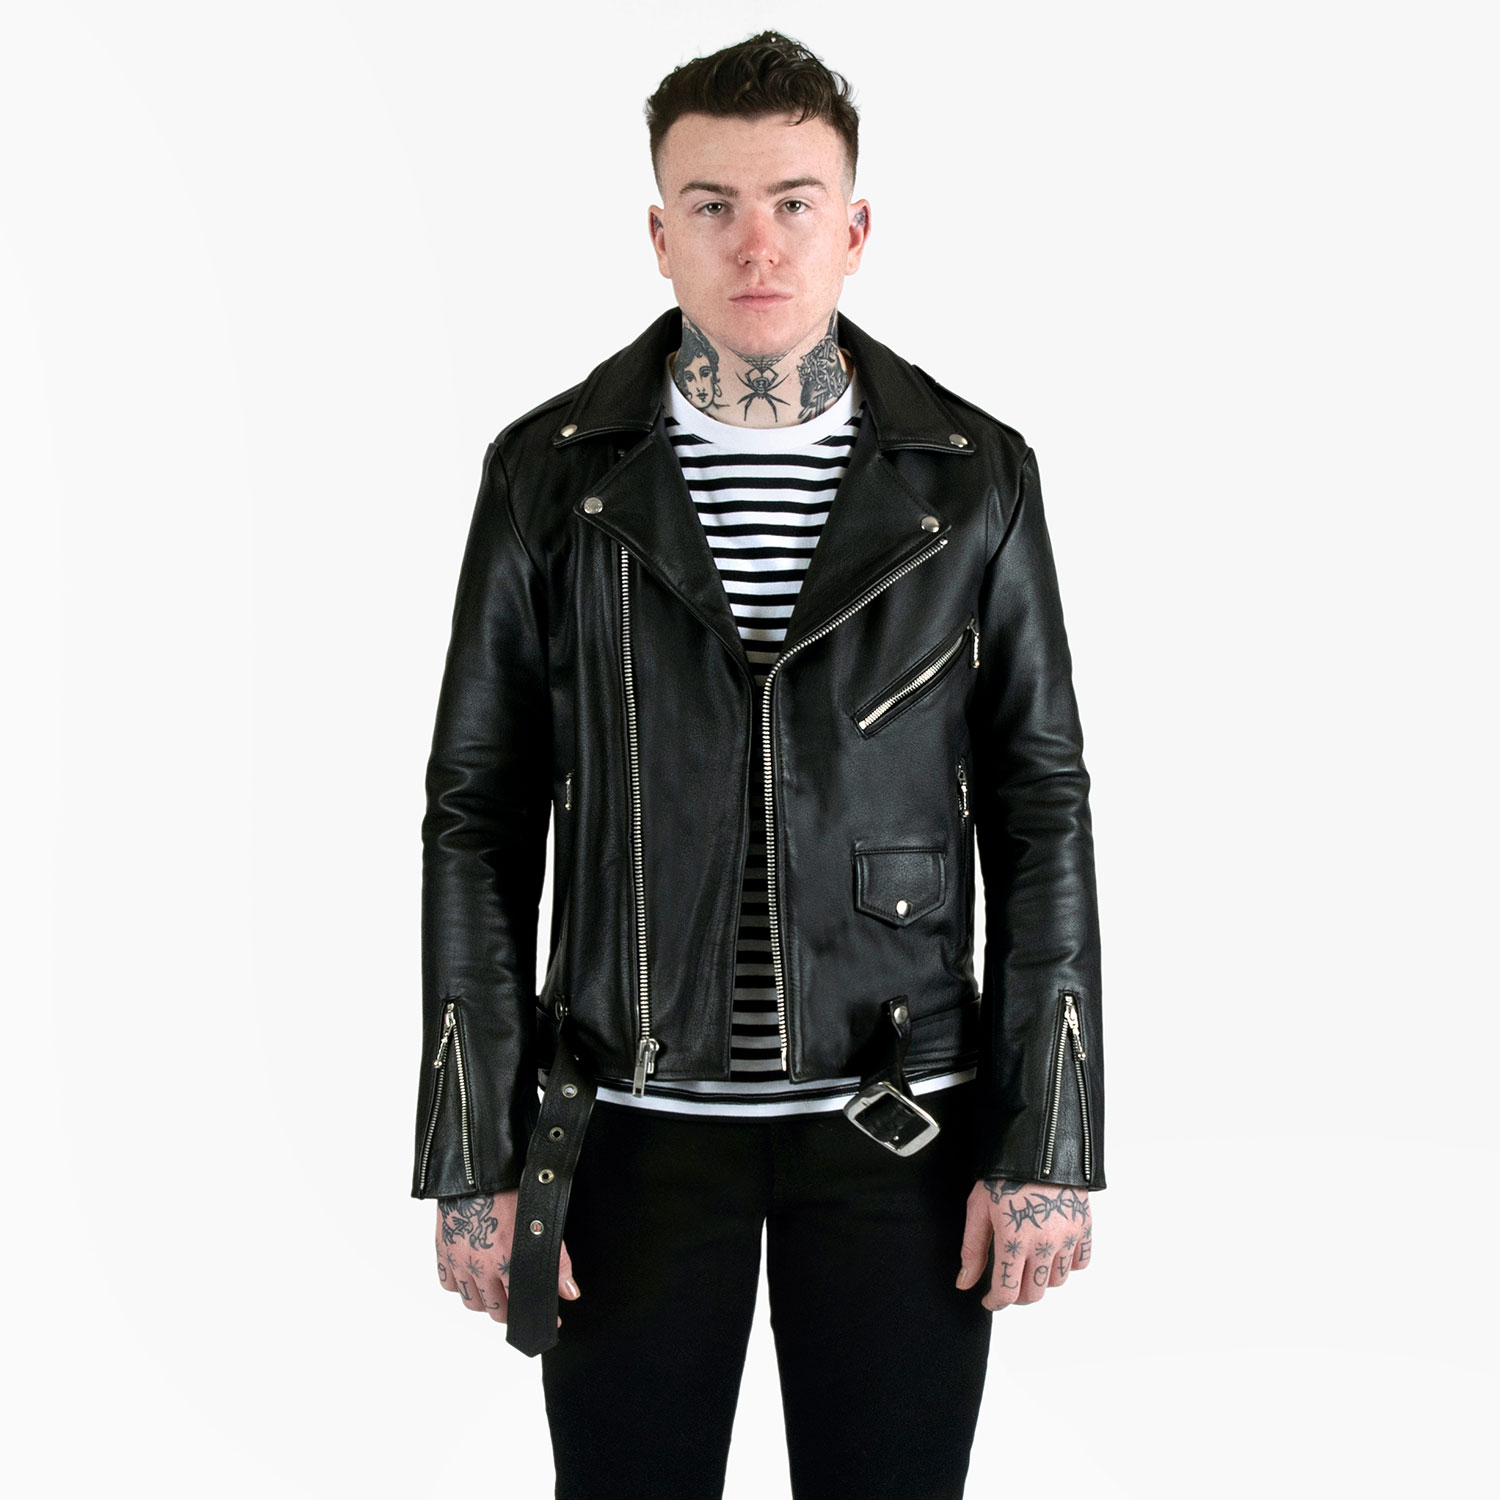 Commando - Black and Nickel Leather Jacket | Straight To Hell Apparel